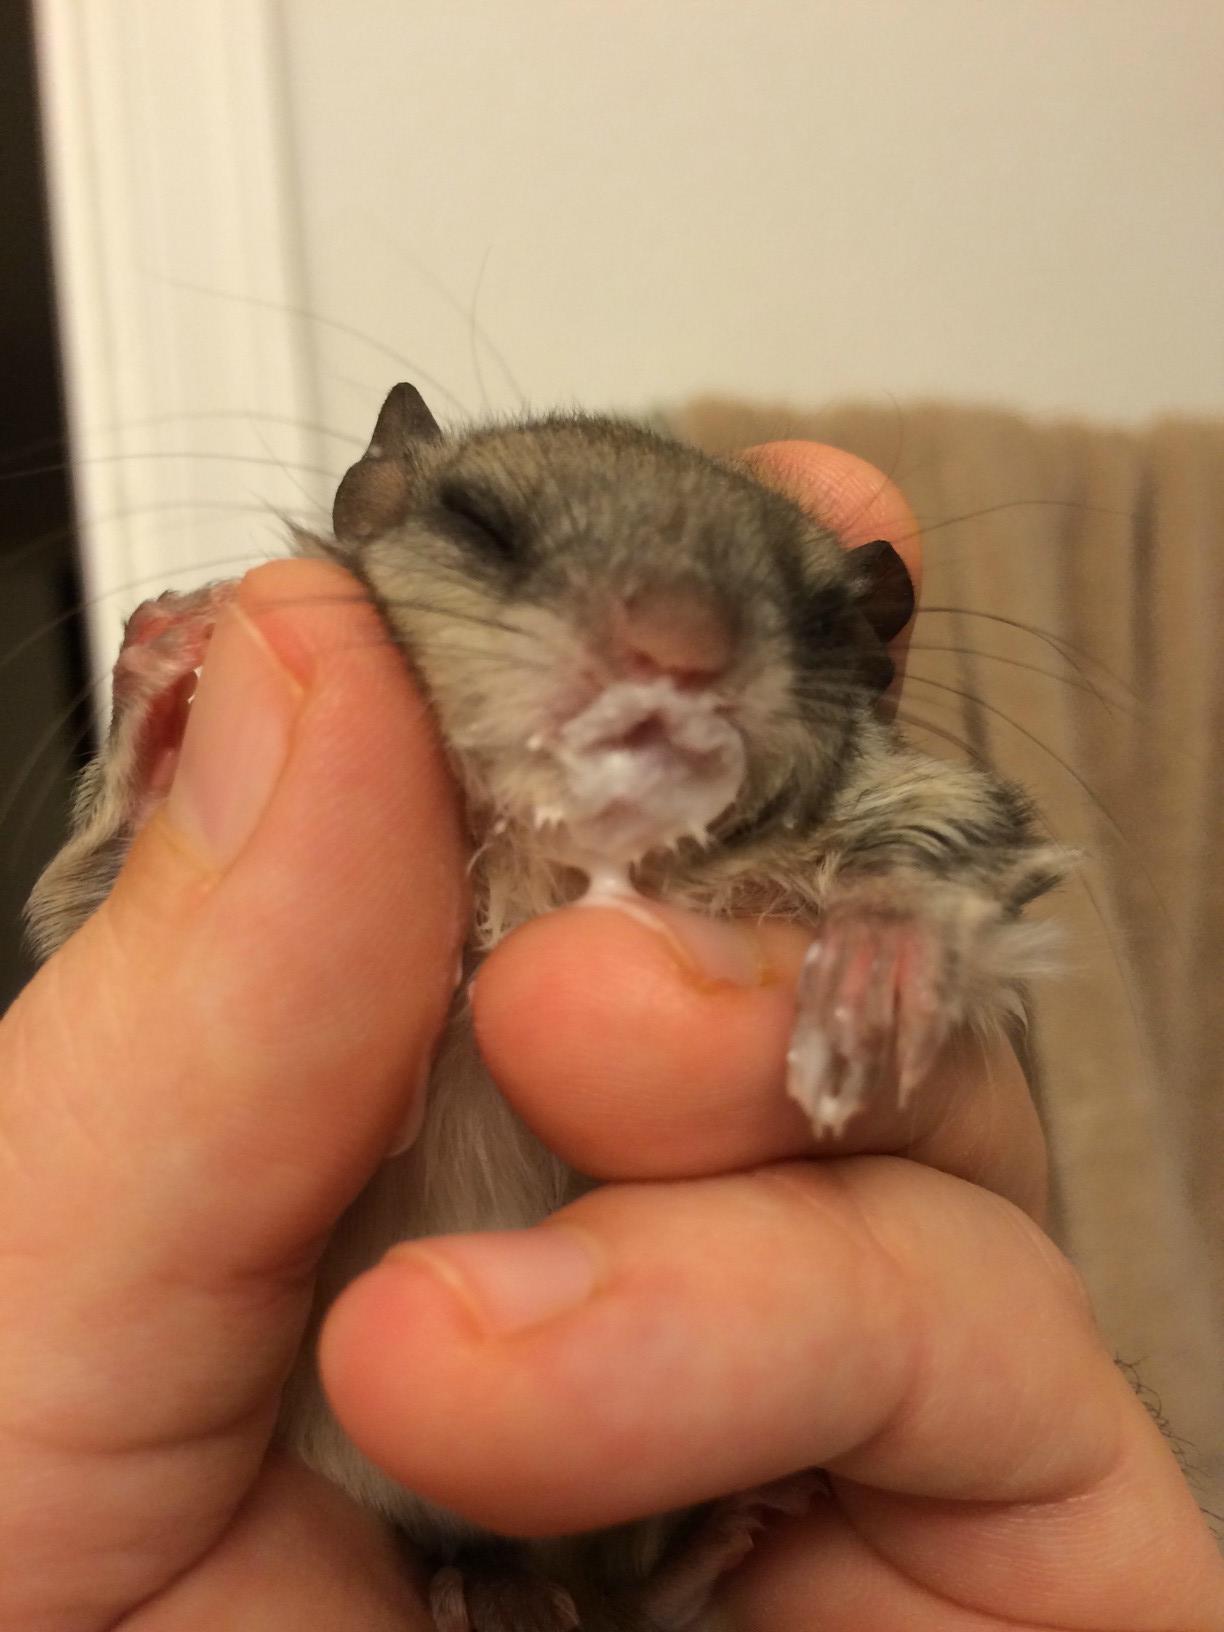 Meet Biscuits, a Newborn Flying Squirrel rescued from the